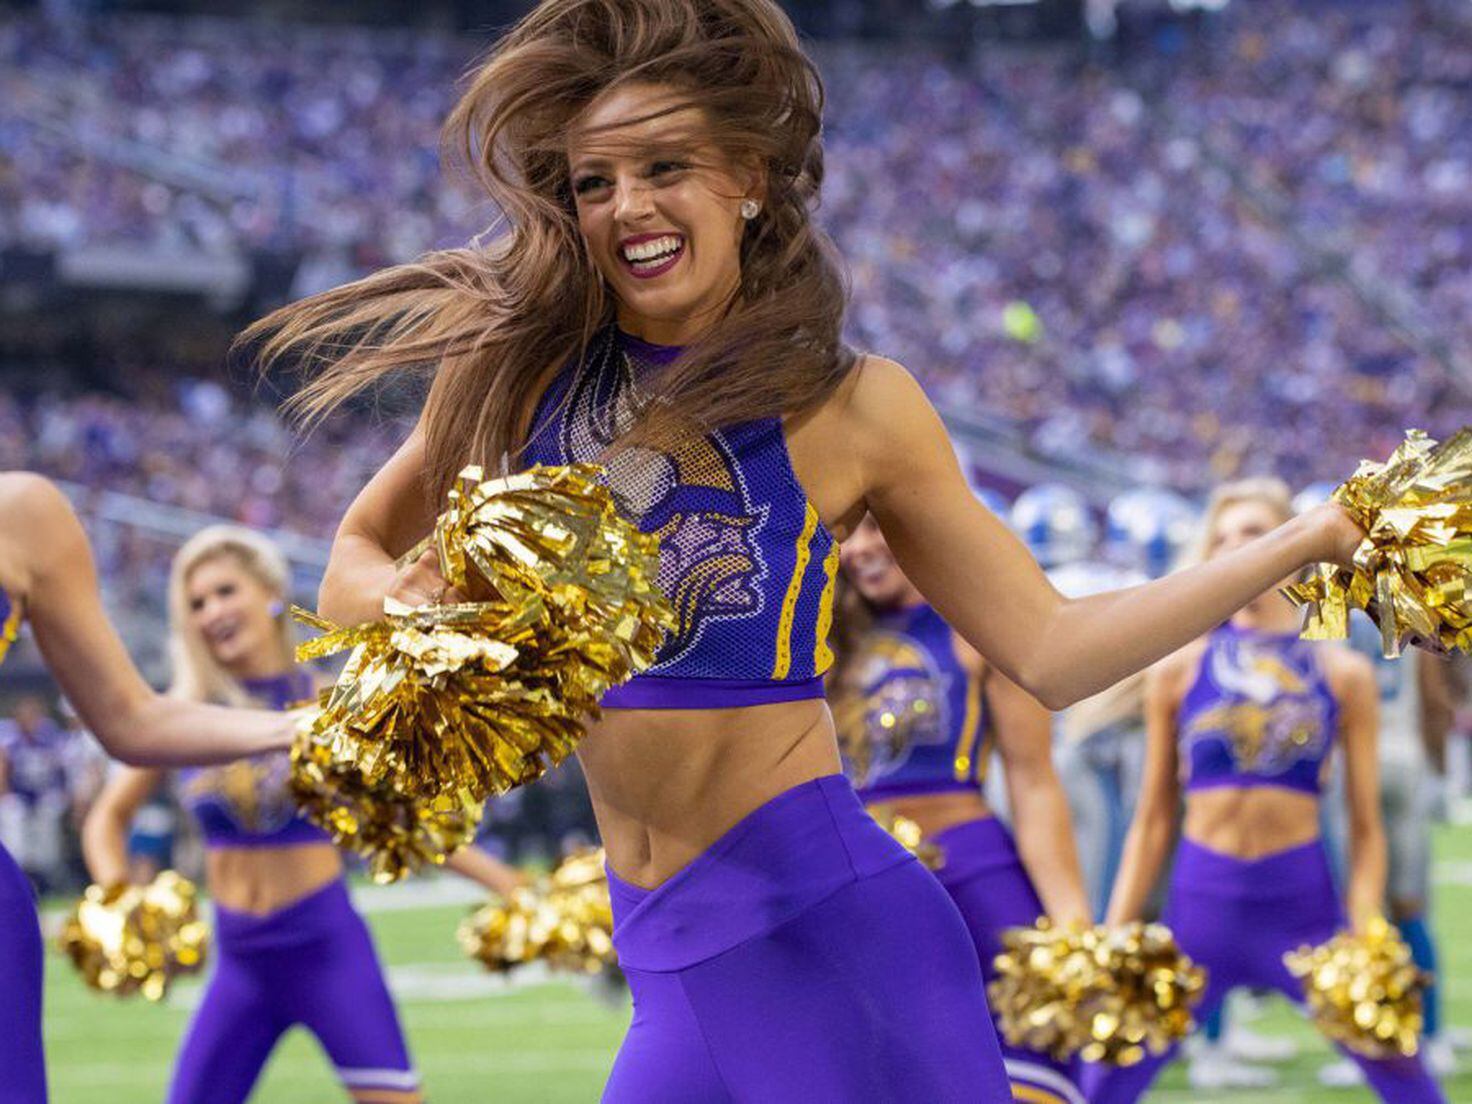 chuck clay recommends Nfl Cheerleaders Gone Wild